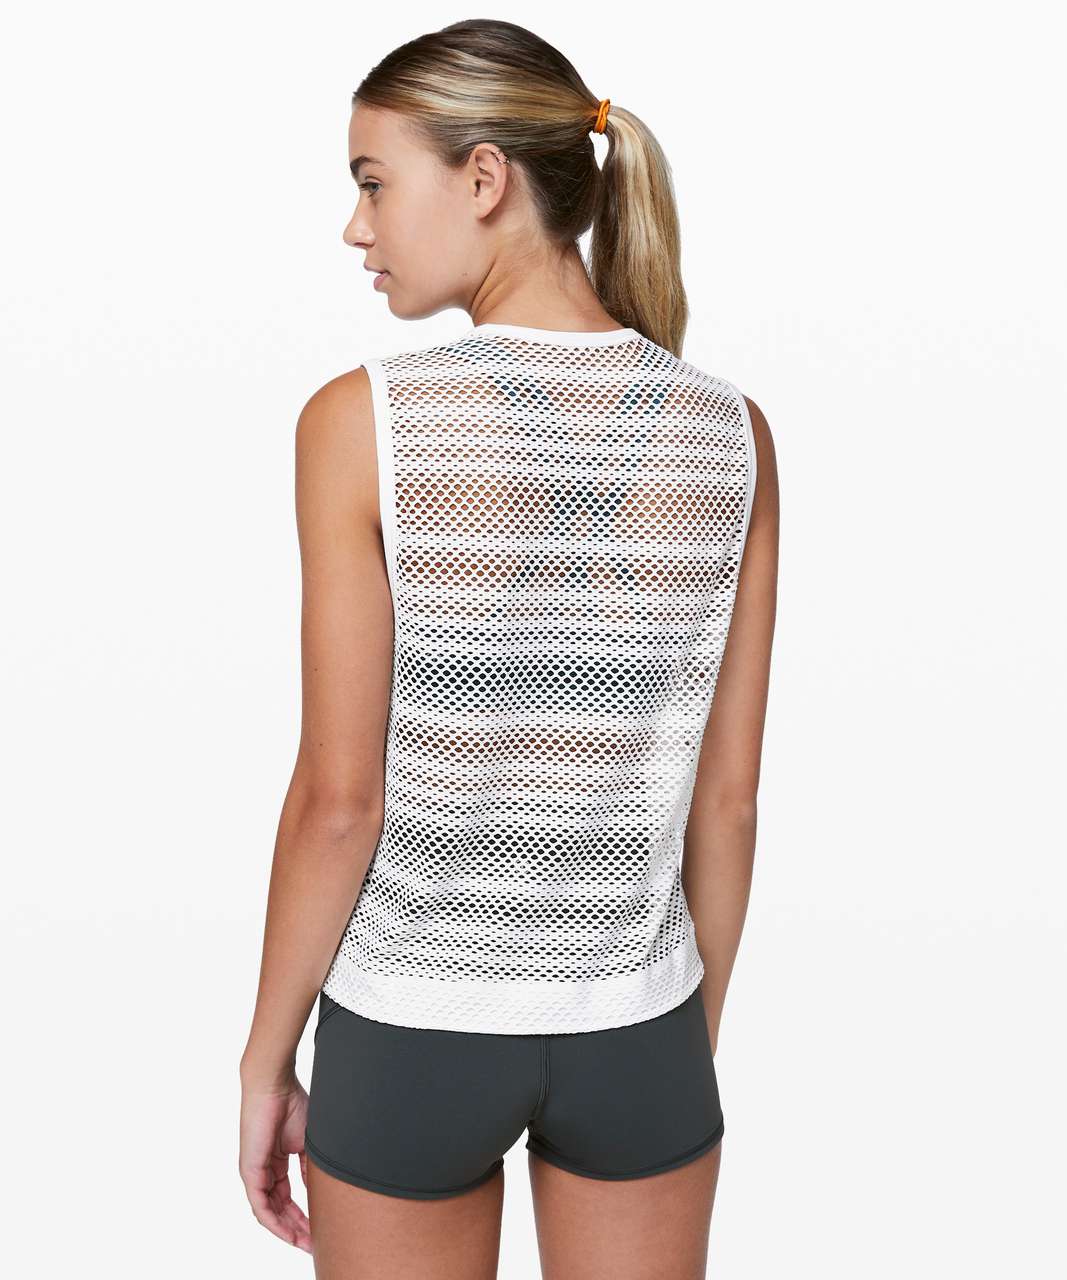 Lululemon Sweat Your Heart Out Tank - White